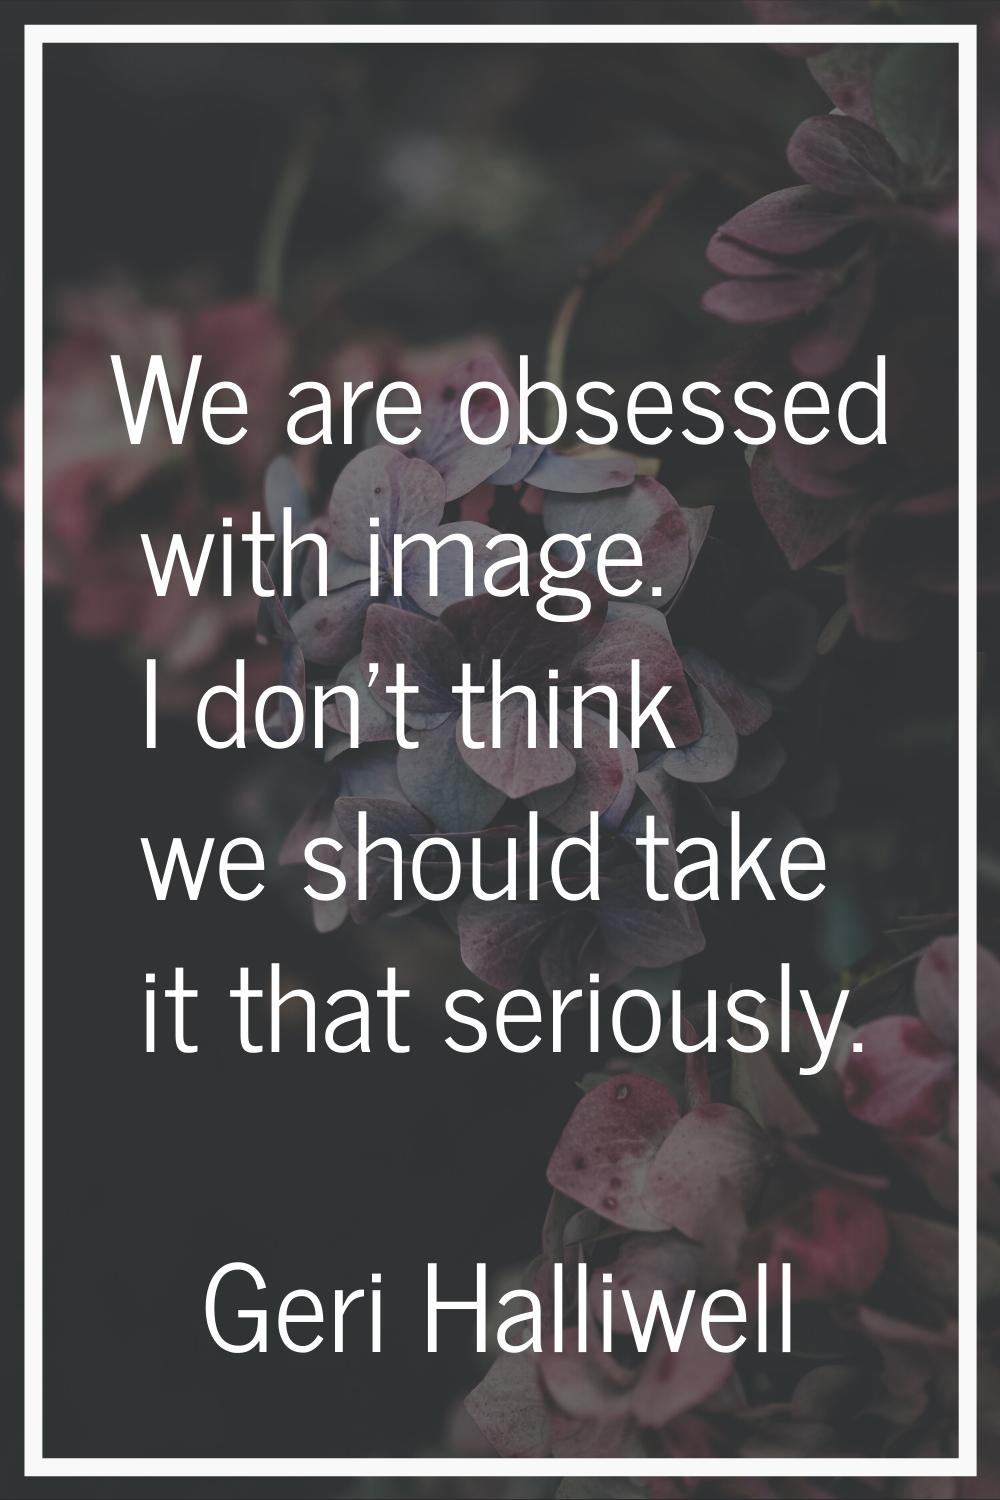 We are obsessed with image. I don't think we should take it that seriously.